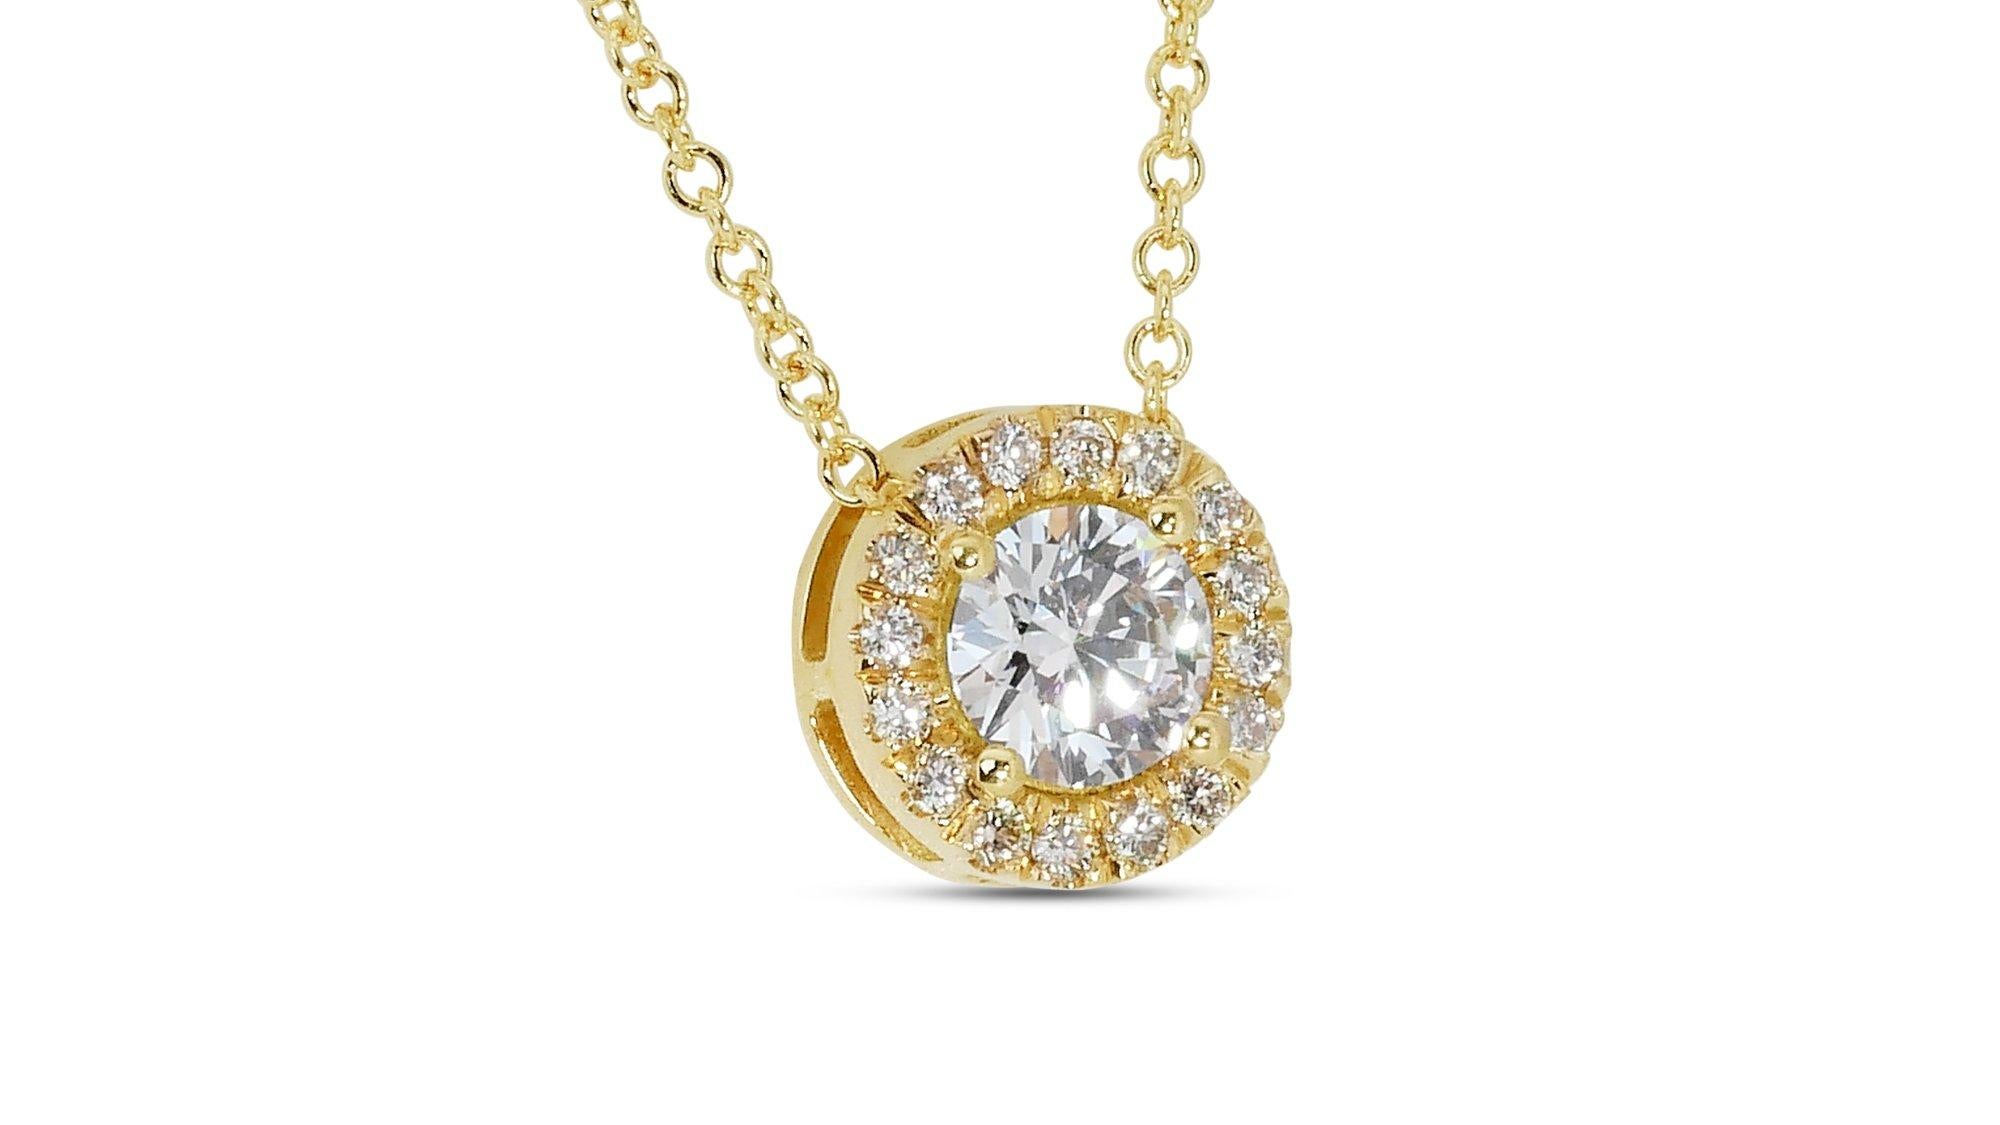 Round Cut Alluring 1.17ct Diamond Halo Necklace in 18k Yellow Gold - GIA Certified For Sale